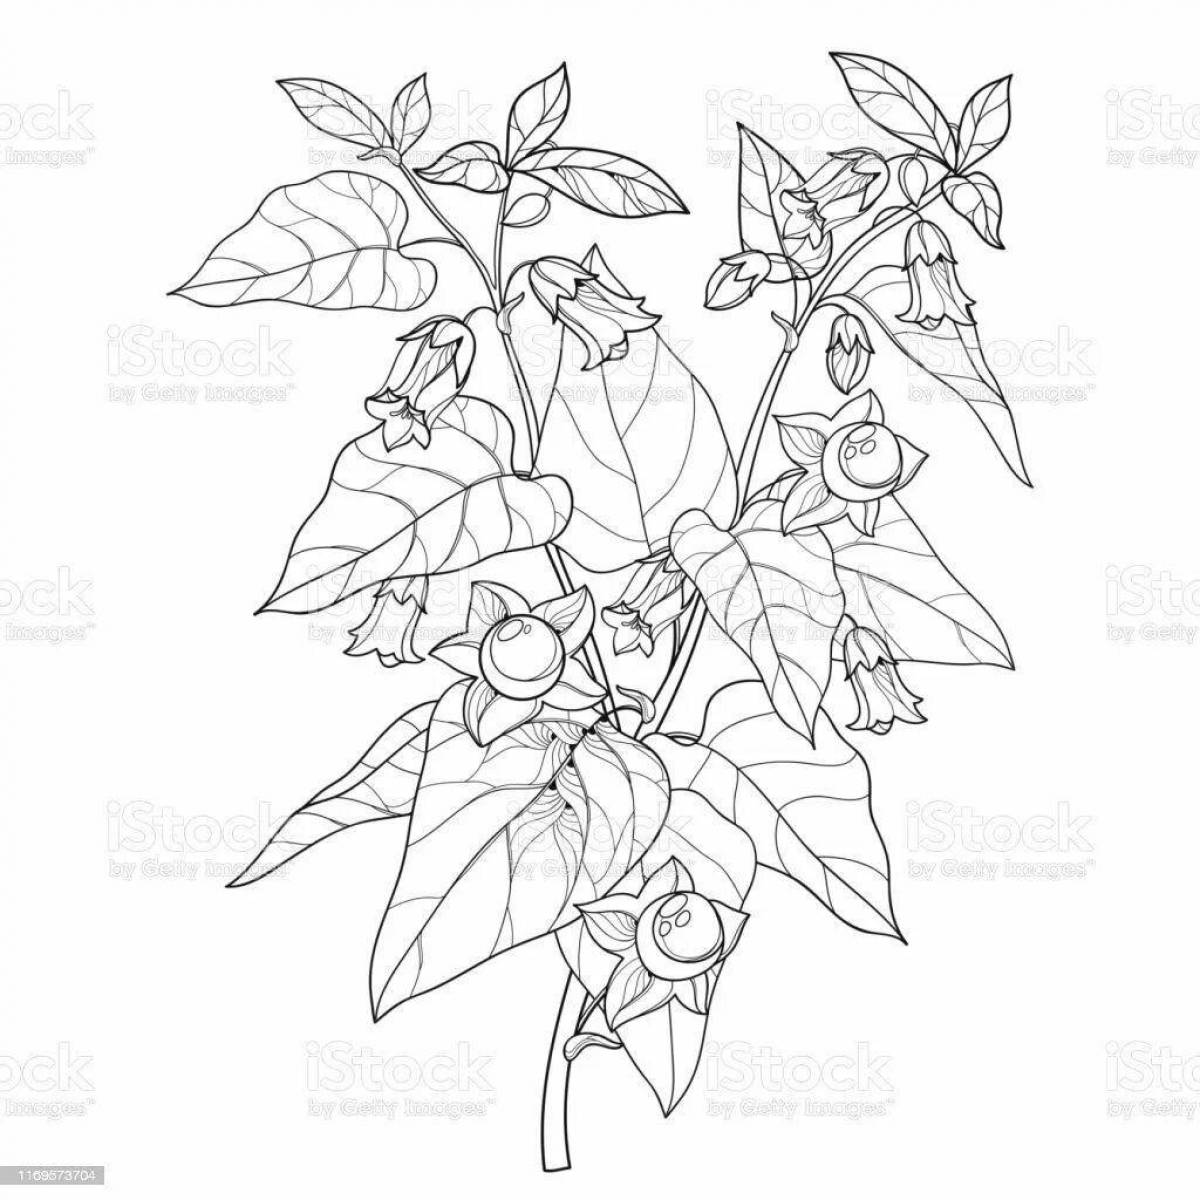 Coloring book of outstanding poisonous plants for children